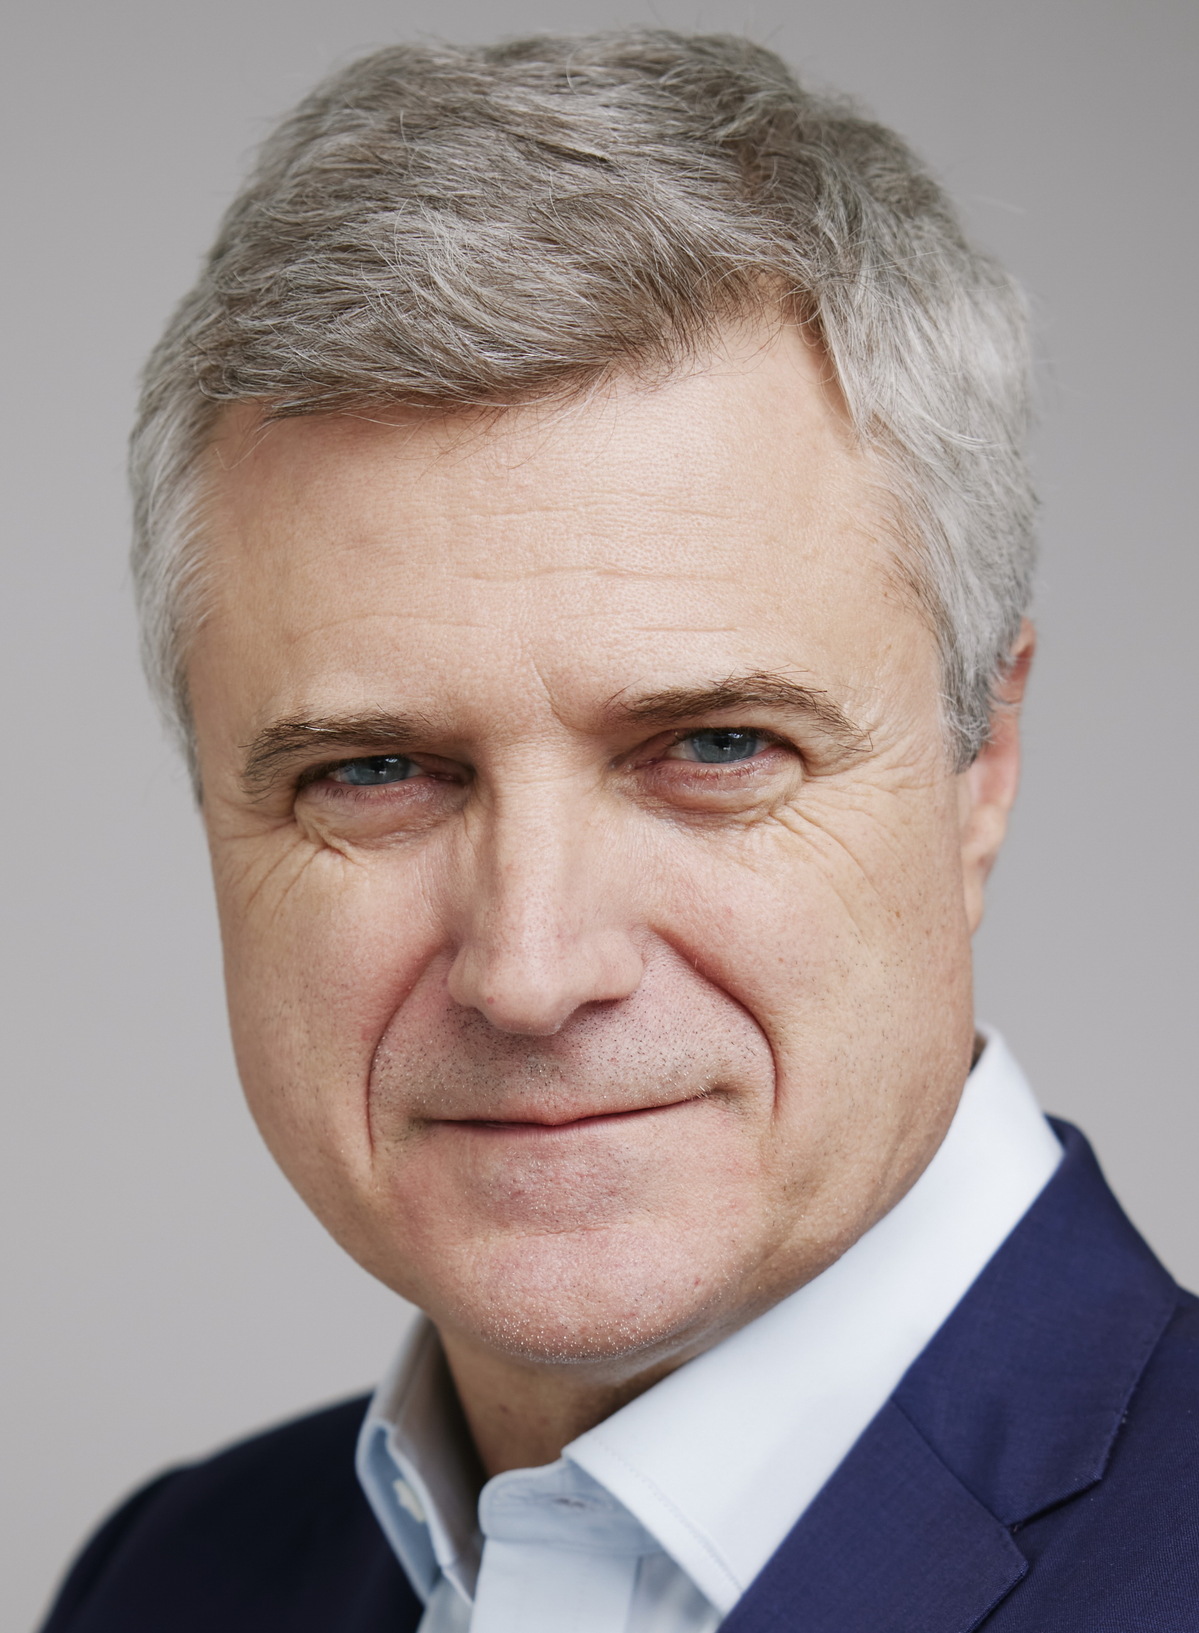 WPP confident of growth potential in China market 